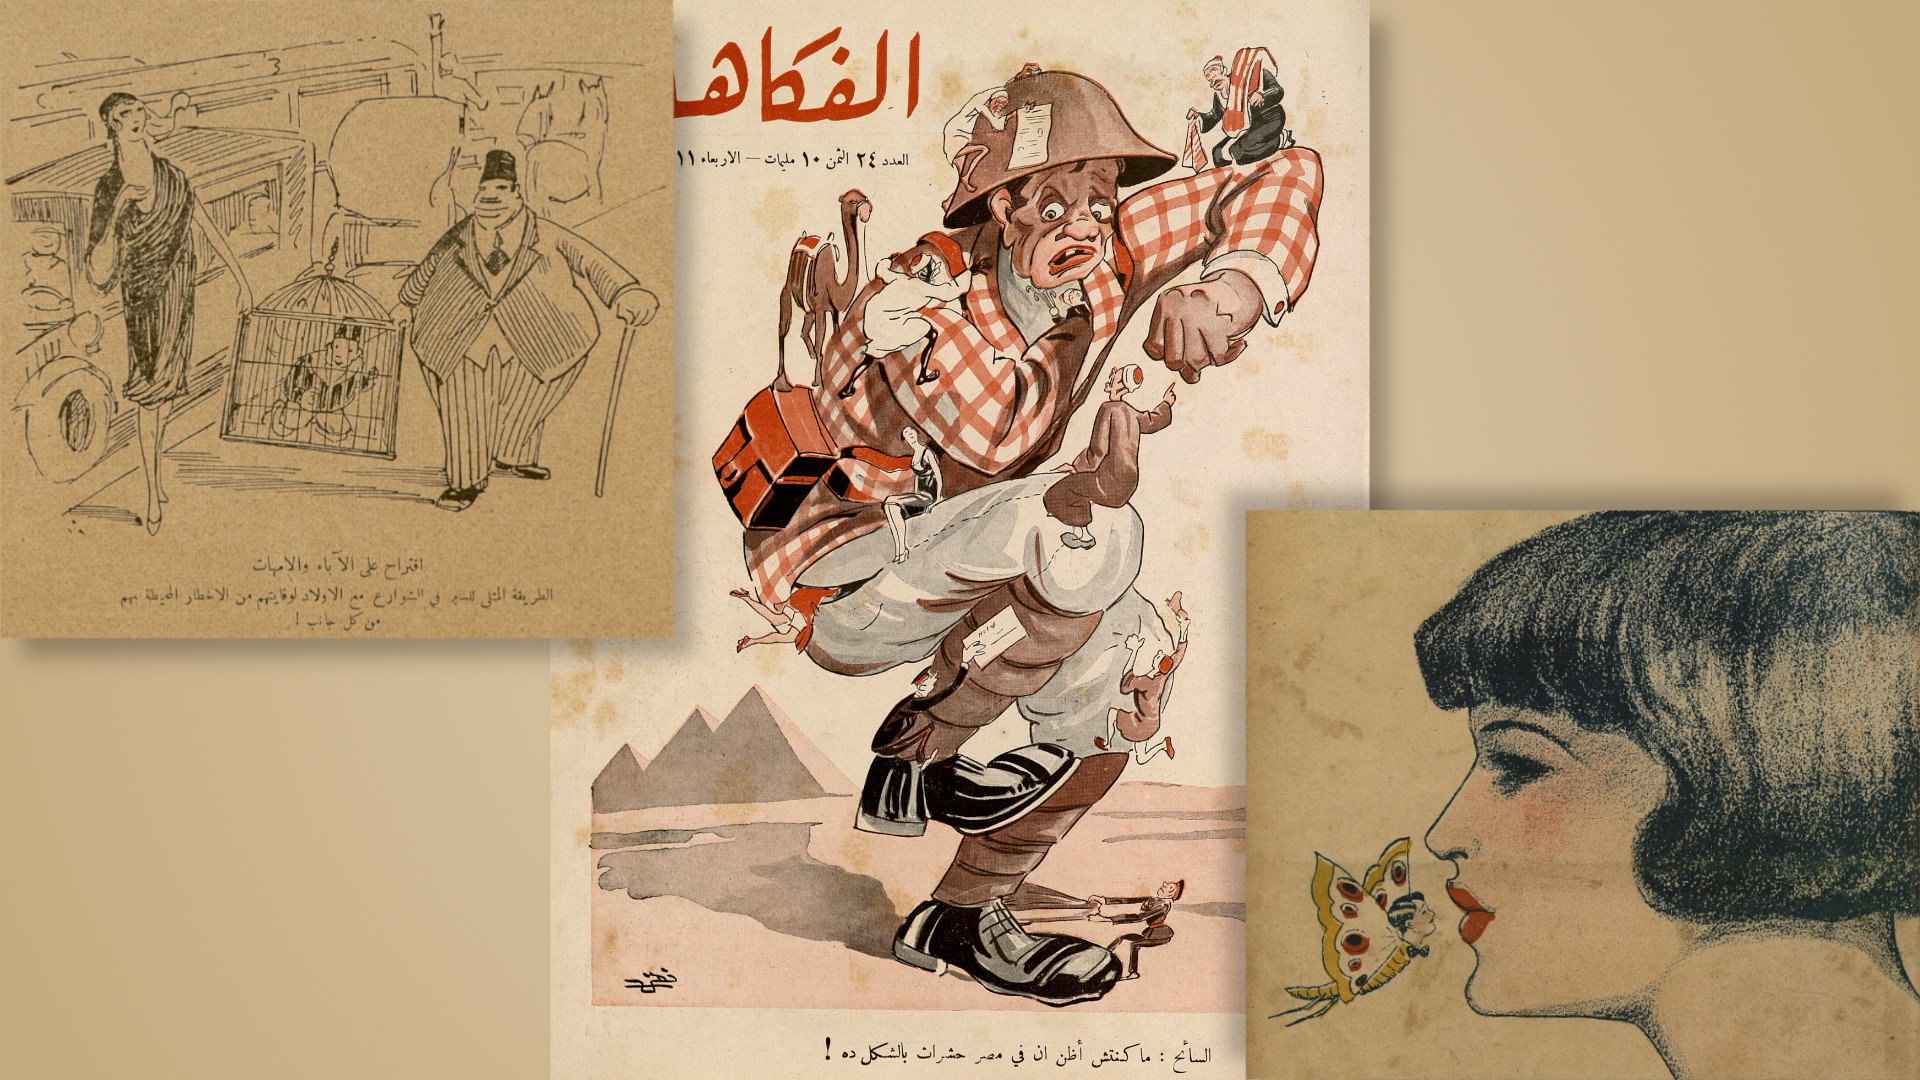 Arab, Ottoman and Turkish caricatures from the late Ottoman and post-Ottoman context